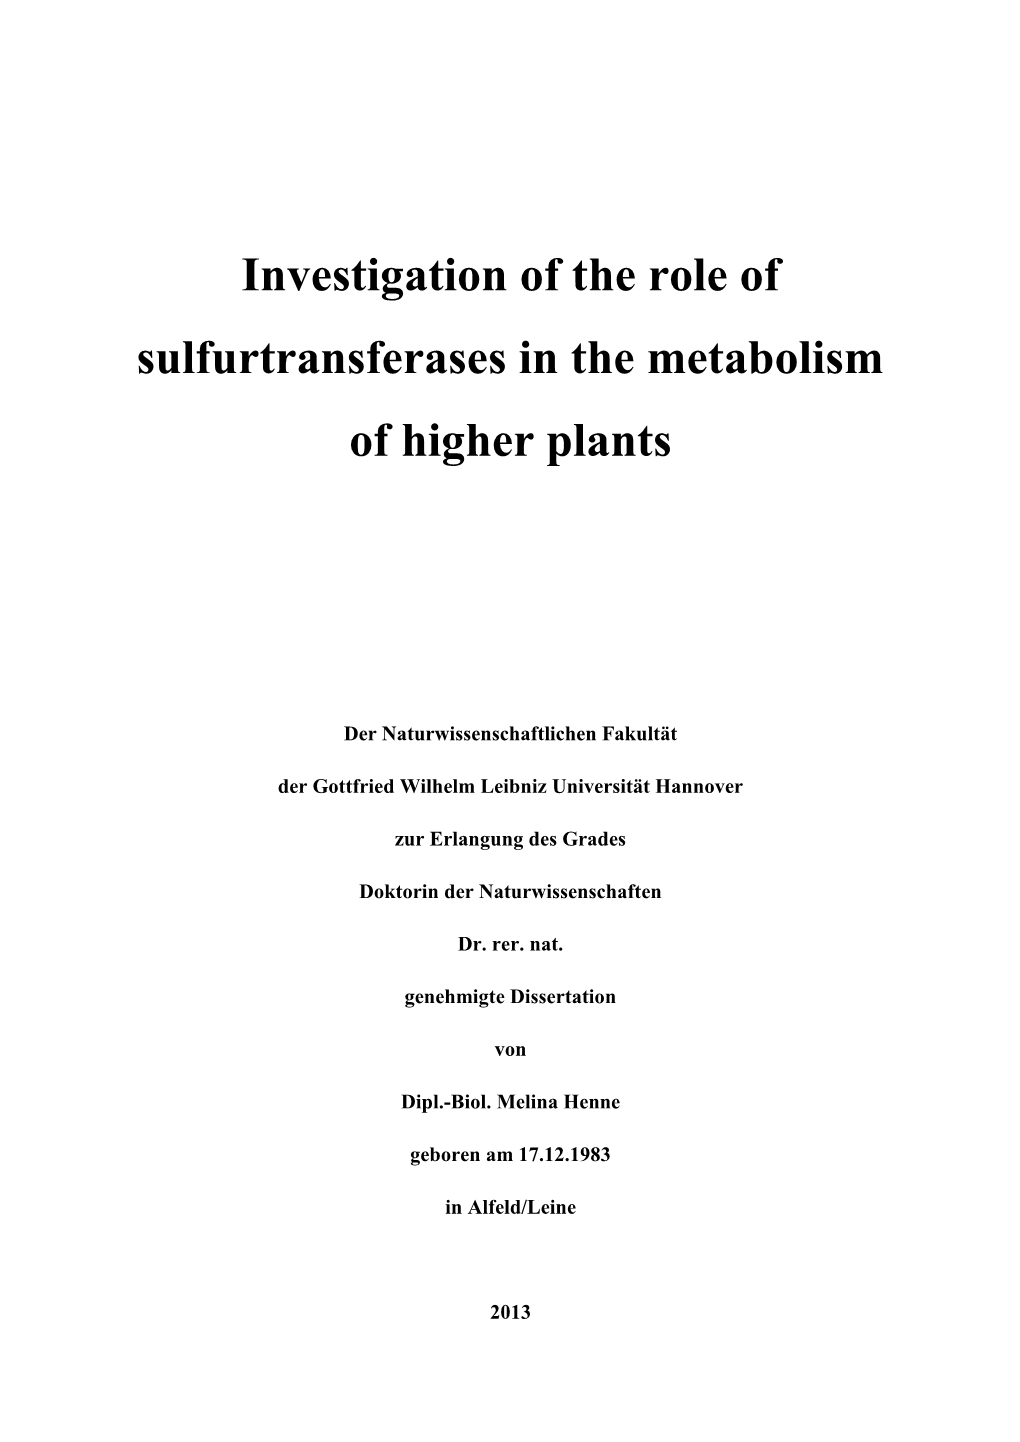 Investigation of the Role of Sulfurtransferases in the Metabolism of Higher Plants